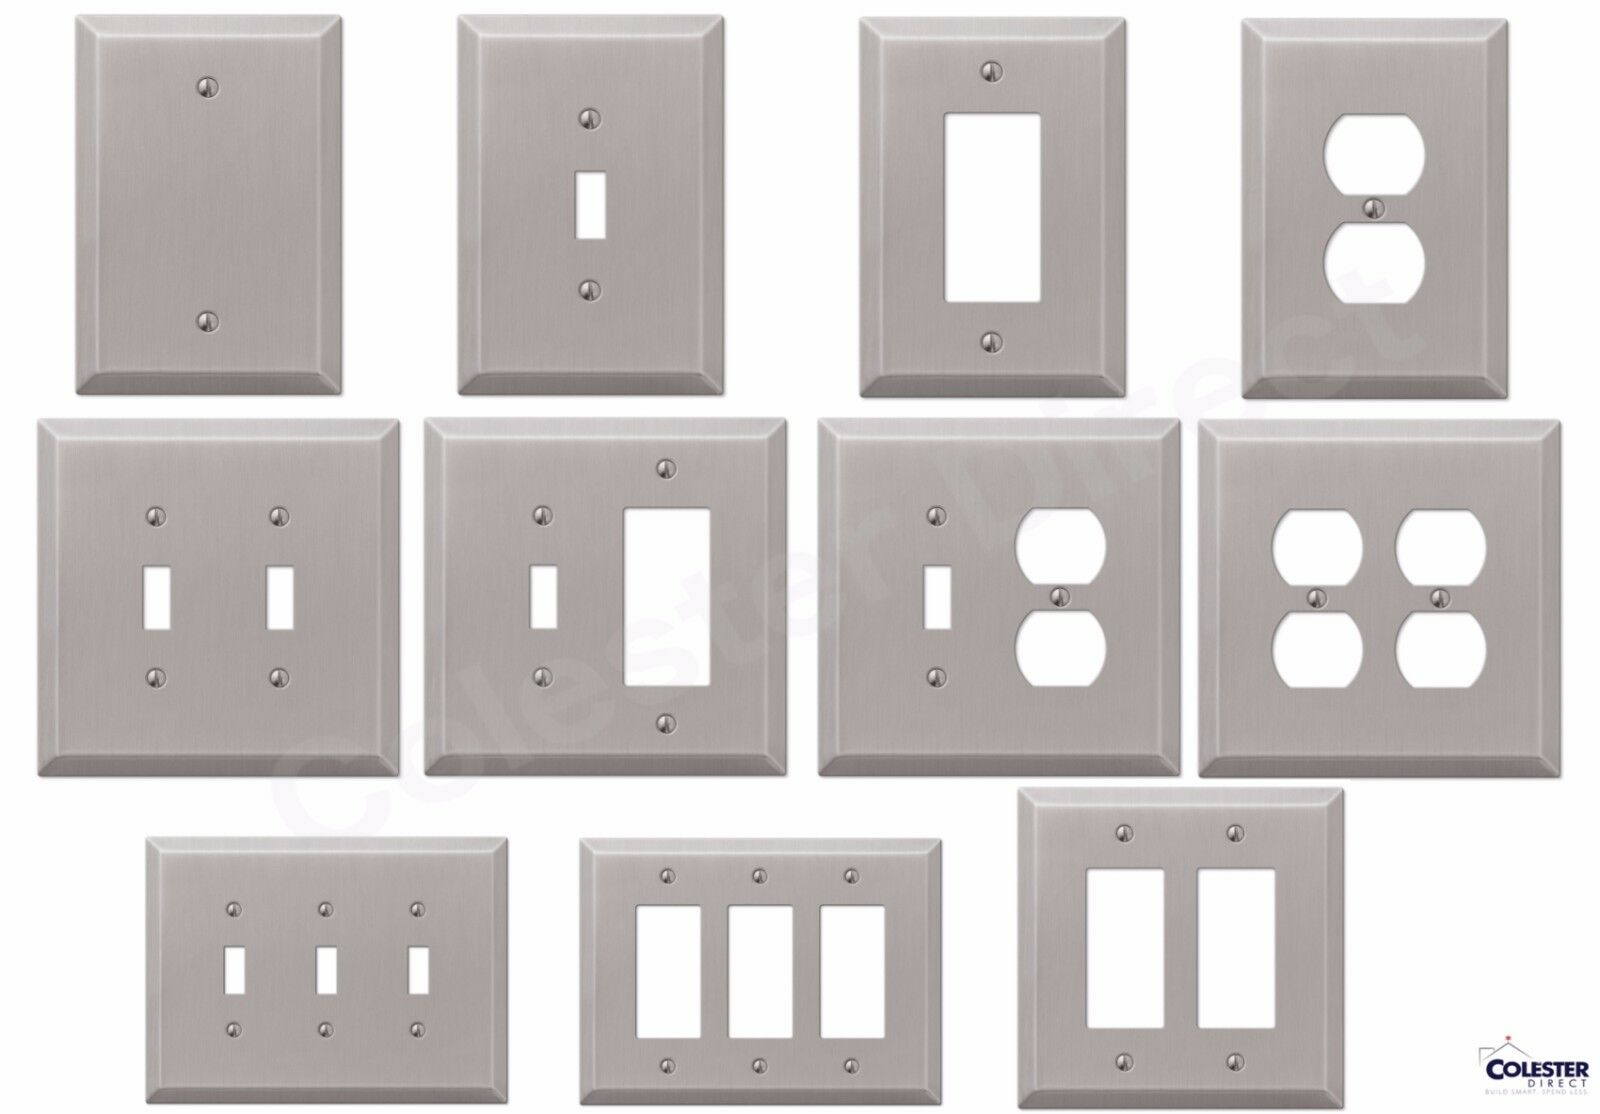 Brushed Satin Nickel Wall Switch Plate Outlet Cover Toggle Rocker Gfi